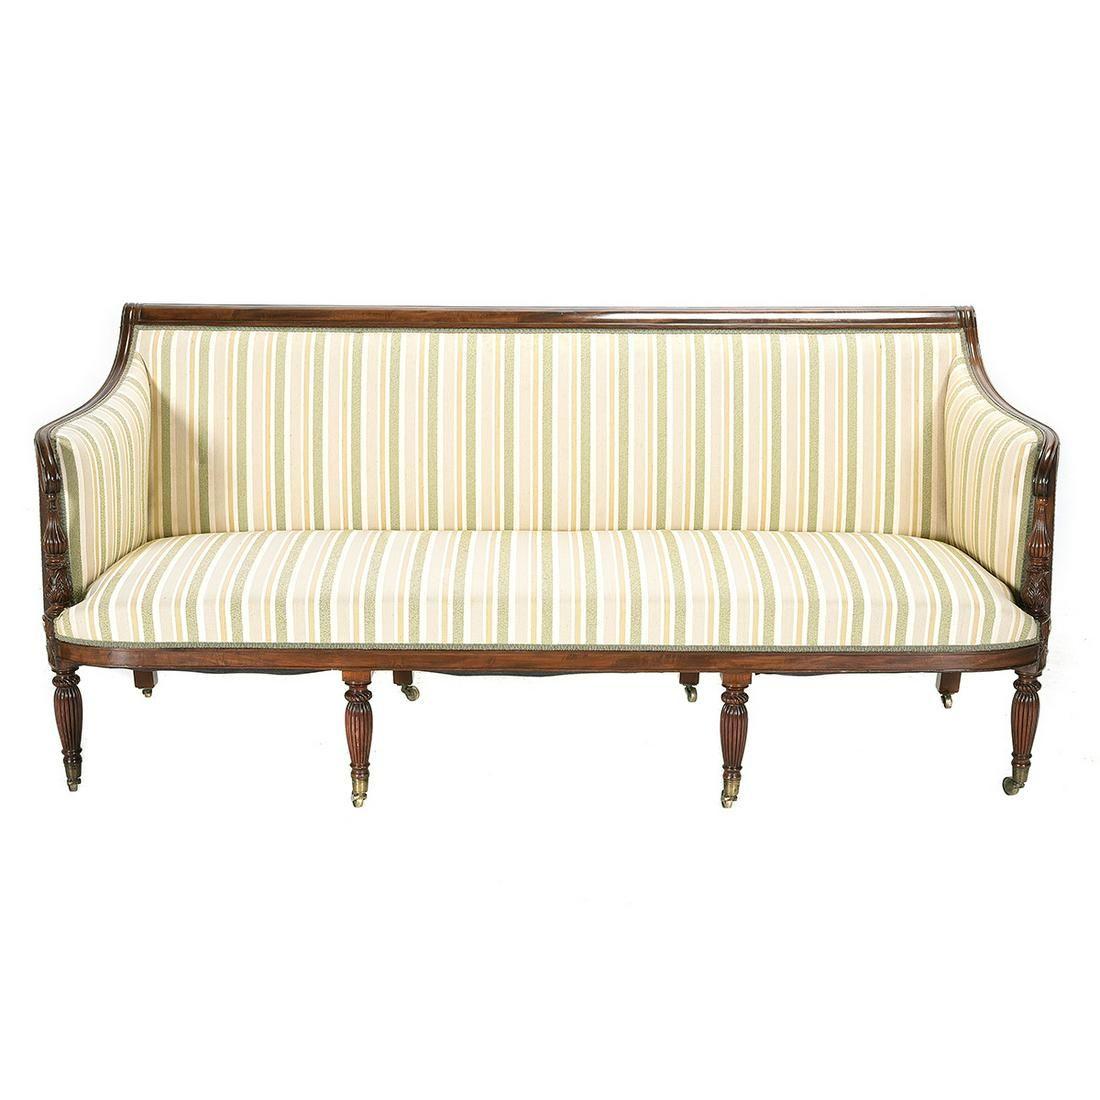 Period Antique American Massachusetts Federal Carved Mahogany Sofa. Curved and scrolled crest rail, with the arm rests terminating in carved pineapples and bulbs, set on fluted legs with brass casters, vertical stripe upholstery. Circa 1800. Solid